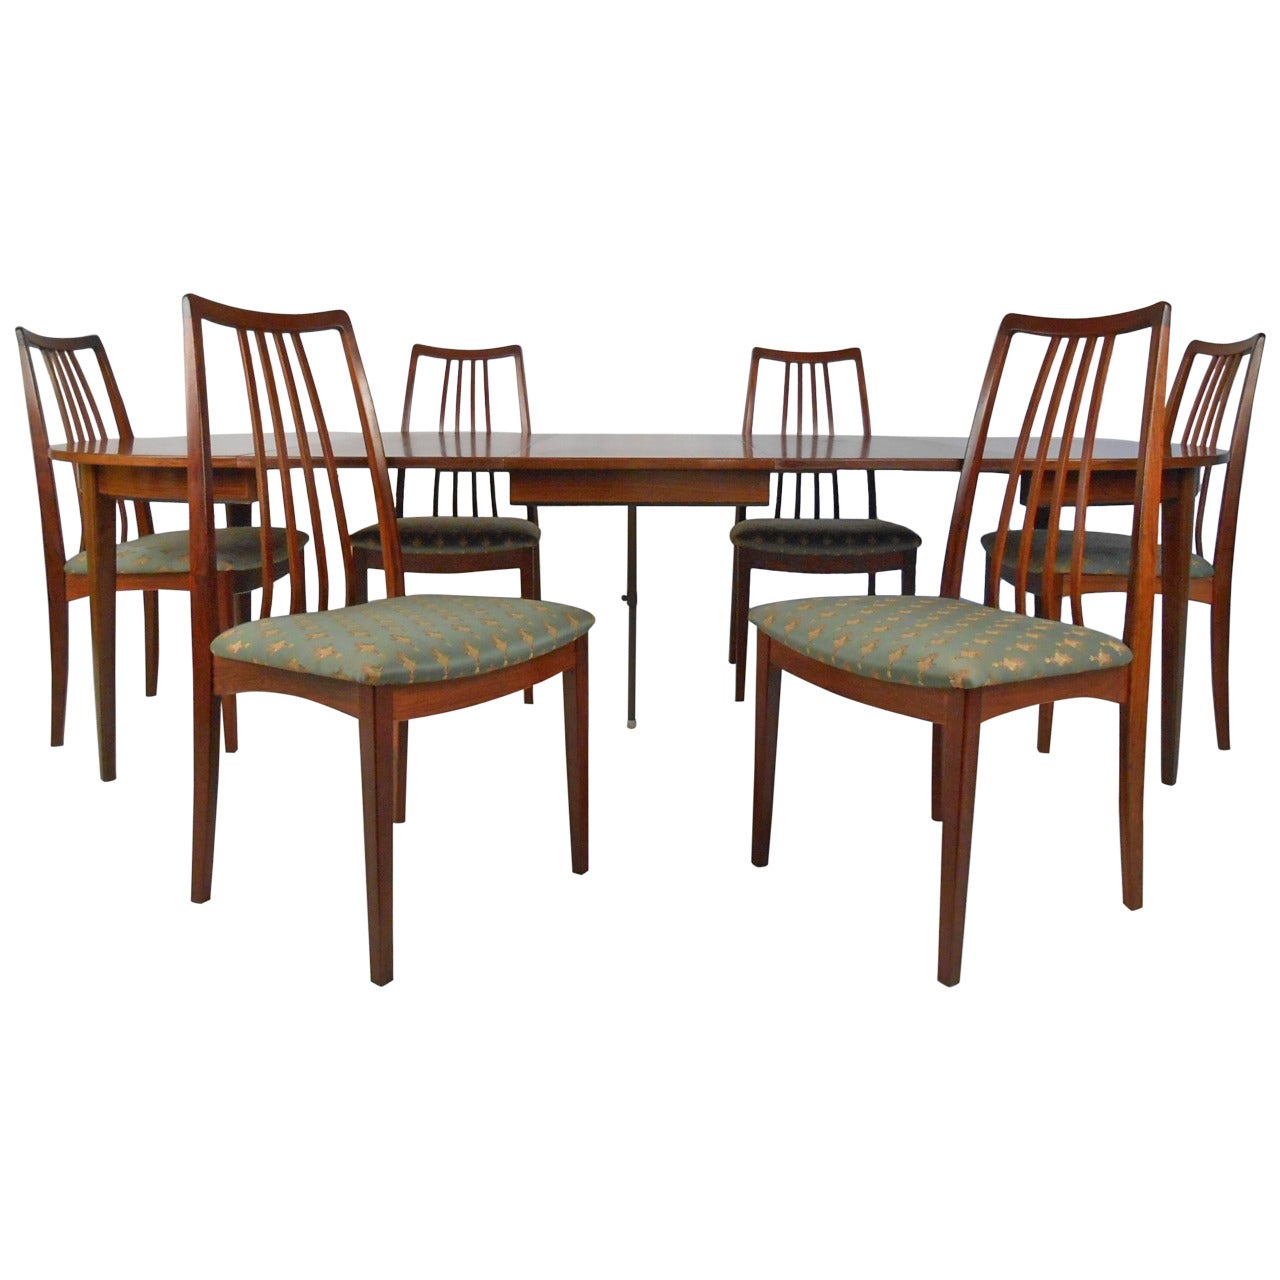 Omann Jun Rosewood Dining Table and Chairs, c. 1959